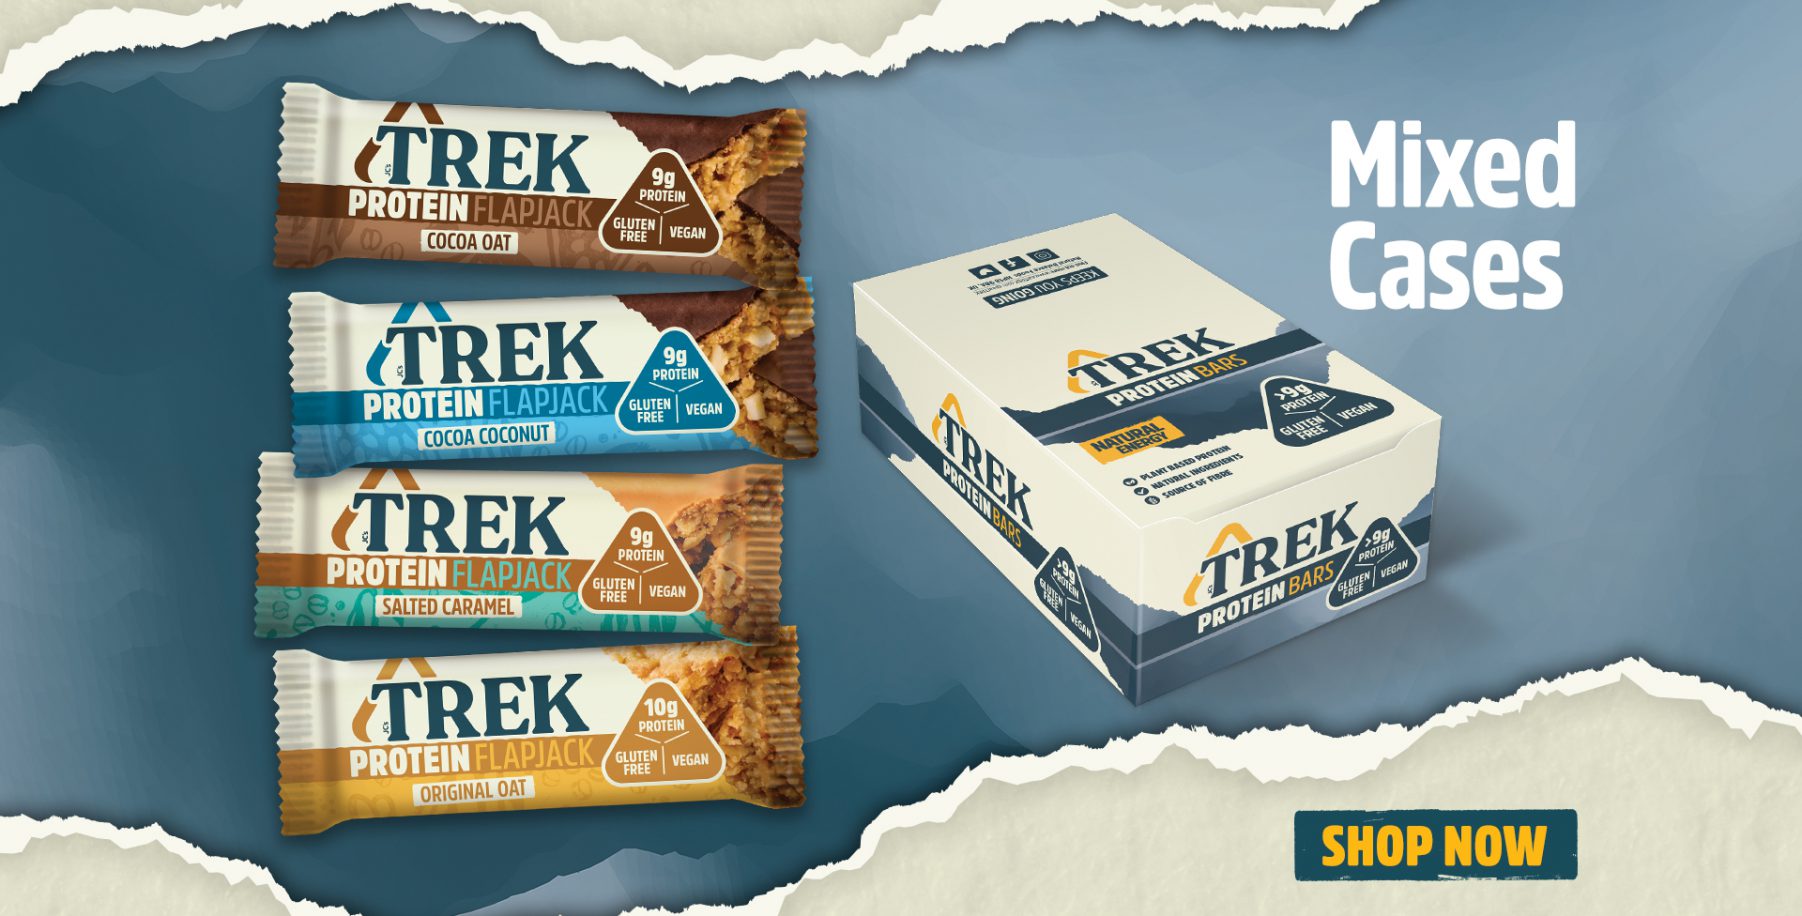 Trek Mixed Cases Products